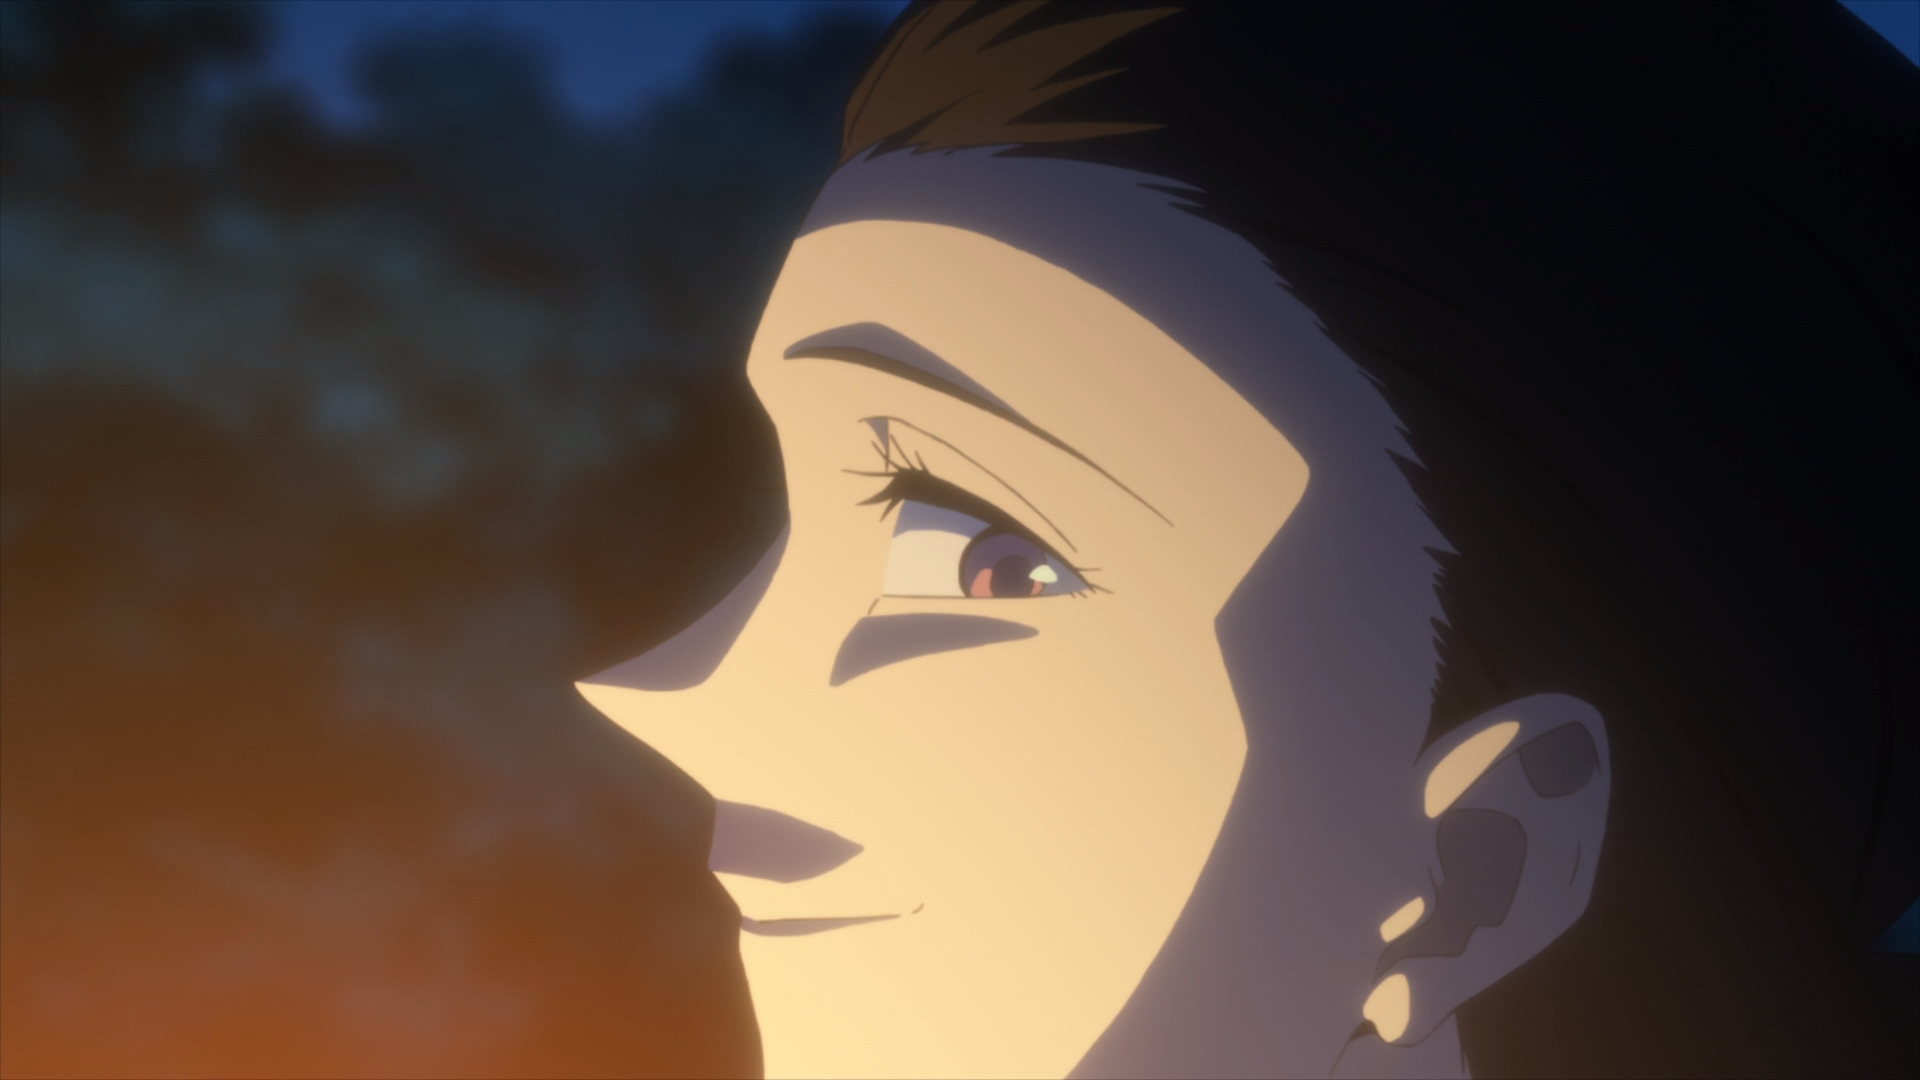 How Isabella's Lullaby Transforms The Promised Neverland • The Daily Fandom